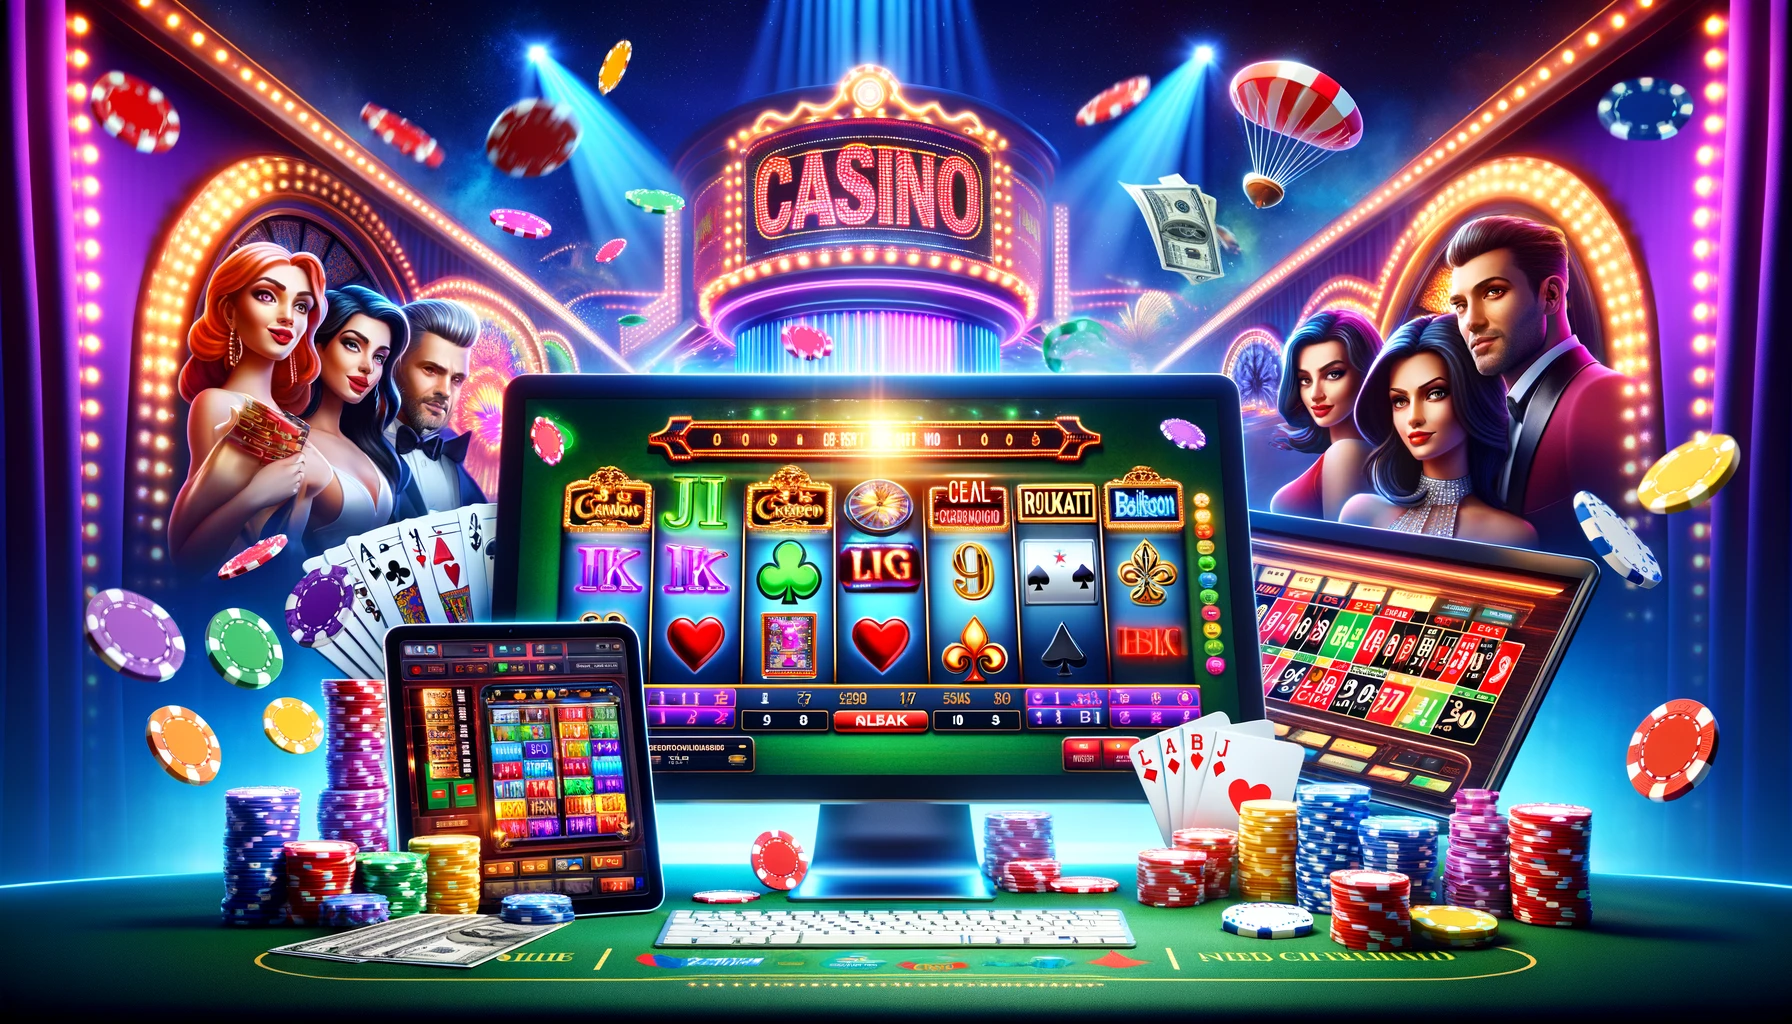 A lively online casino scene with various games like slots, poker, blackjack, roulette, and baccarat displayed on a computer and mobile screen, with colorful lights, casino chips, and money symbols in the background.